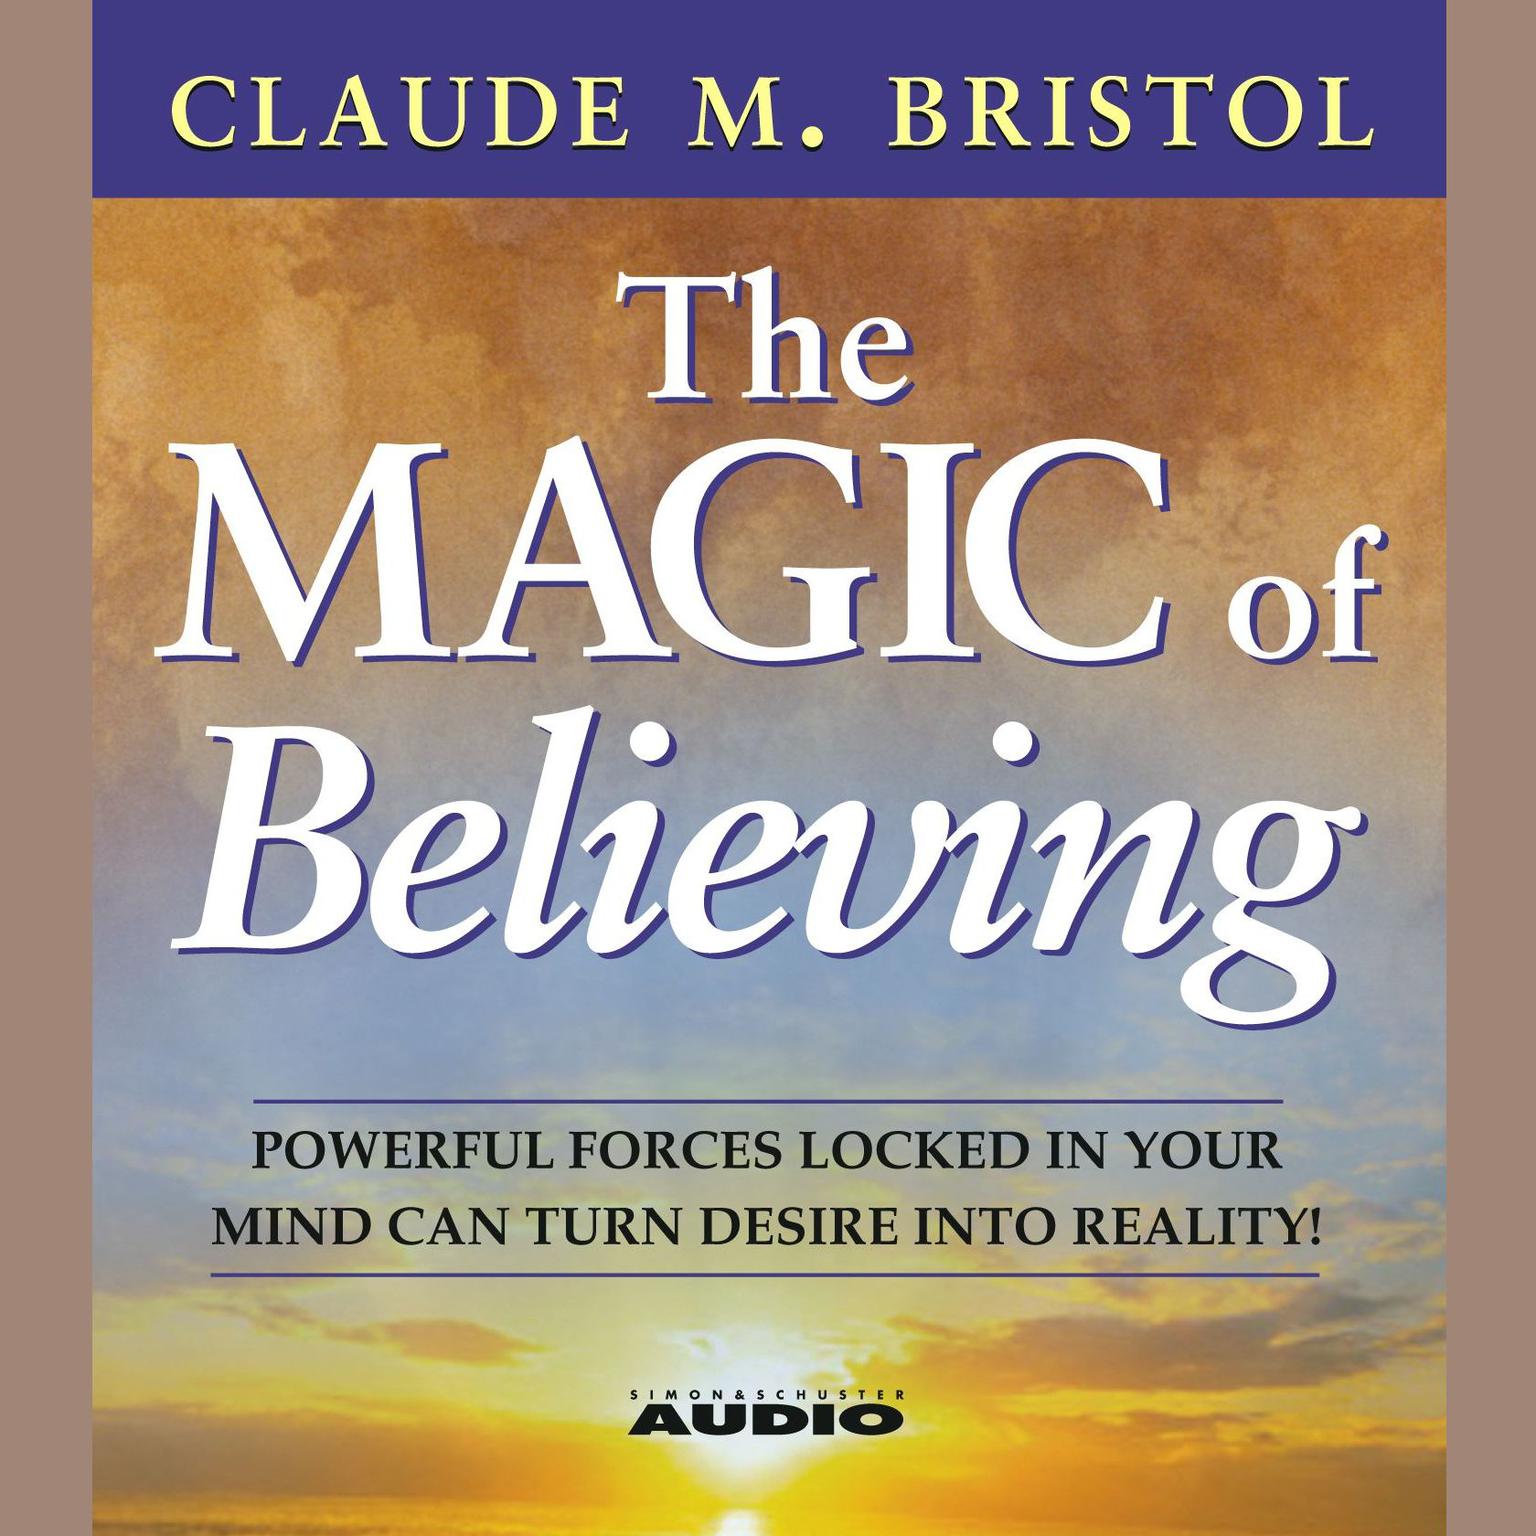 The Magic Of Believing (Abridged) Audiobook, by Claude M. Bristol